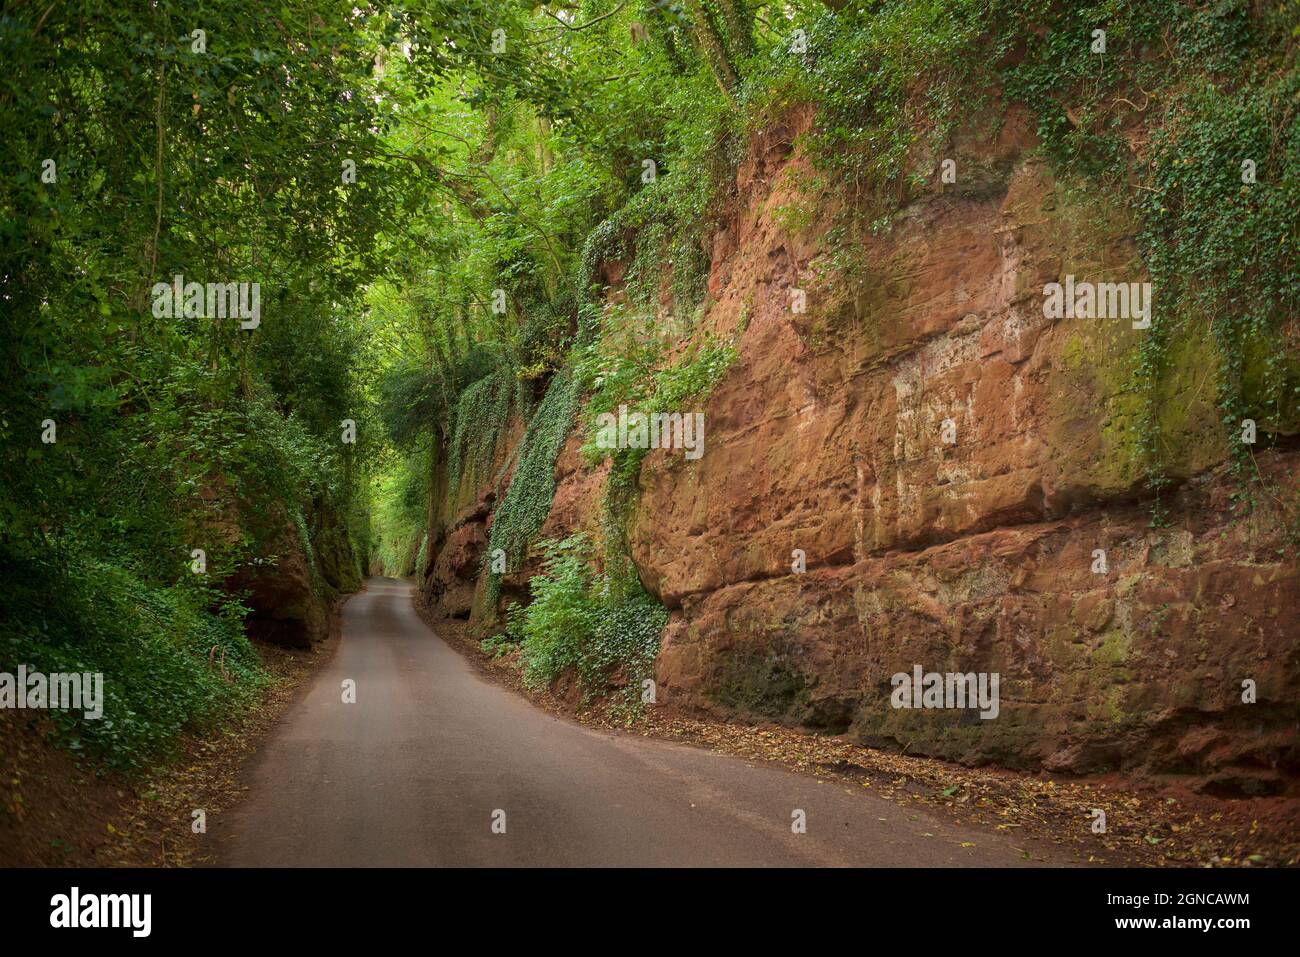 Nynehead hollow near Taunton, Somerset, Engand, UK. Hollow way, Sunken Lane, West Country. Sandstone gorge at Nynehead. The gorge is cut through Triassic Otter Sandstone. Its creation in the mid 19C provided work for local men in winter. Stock Photo